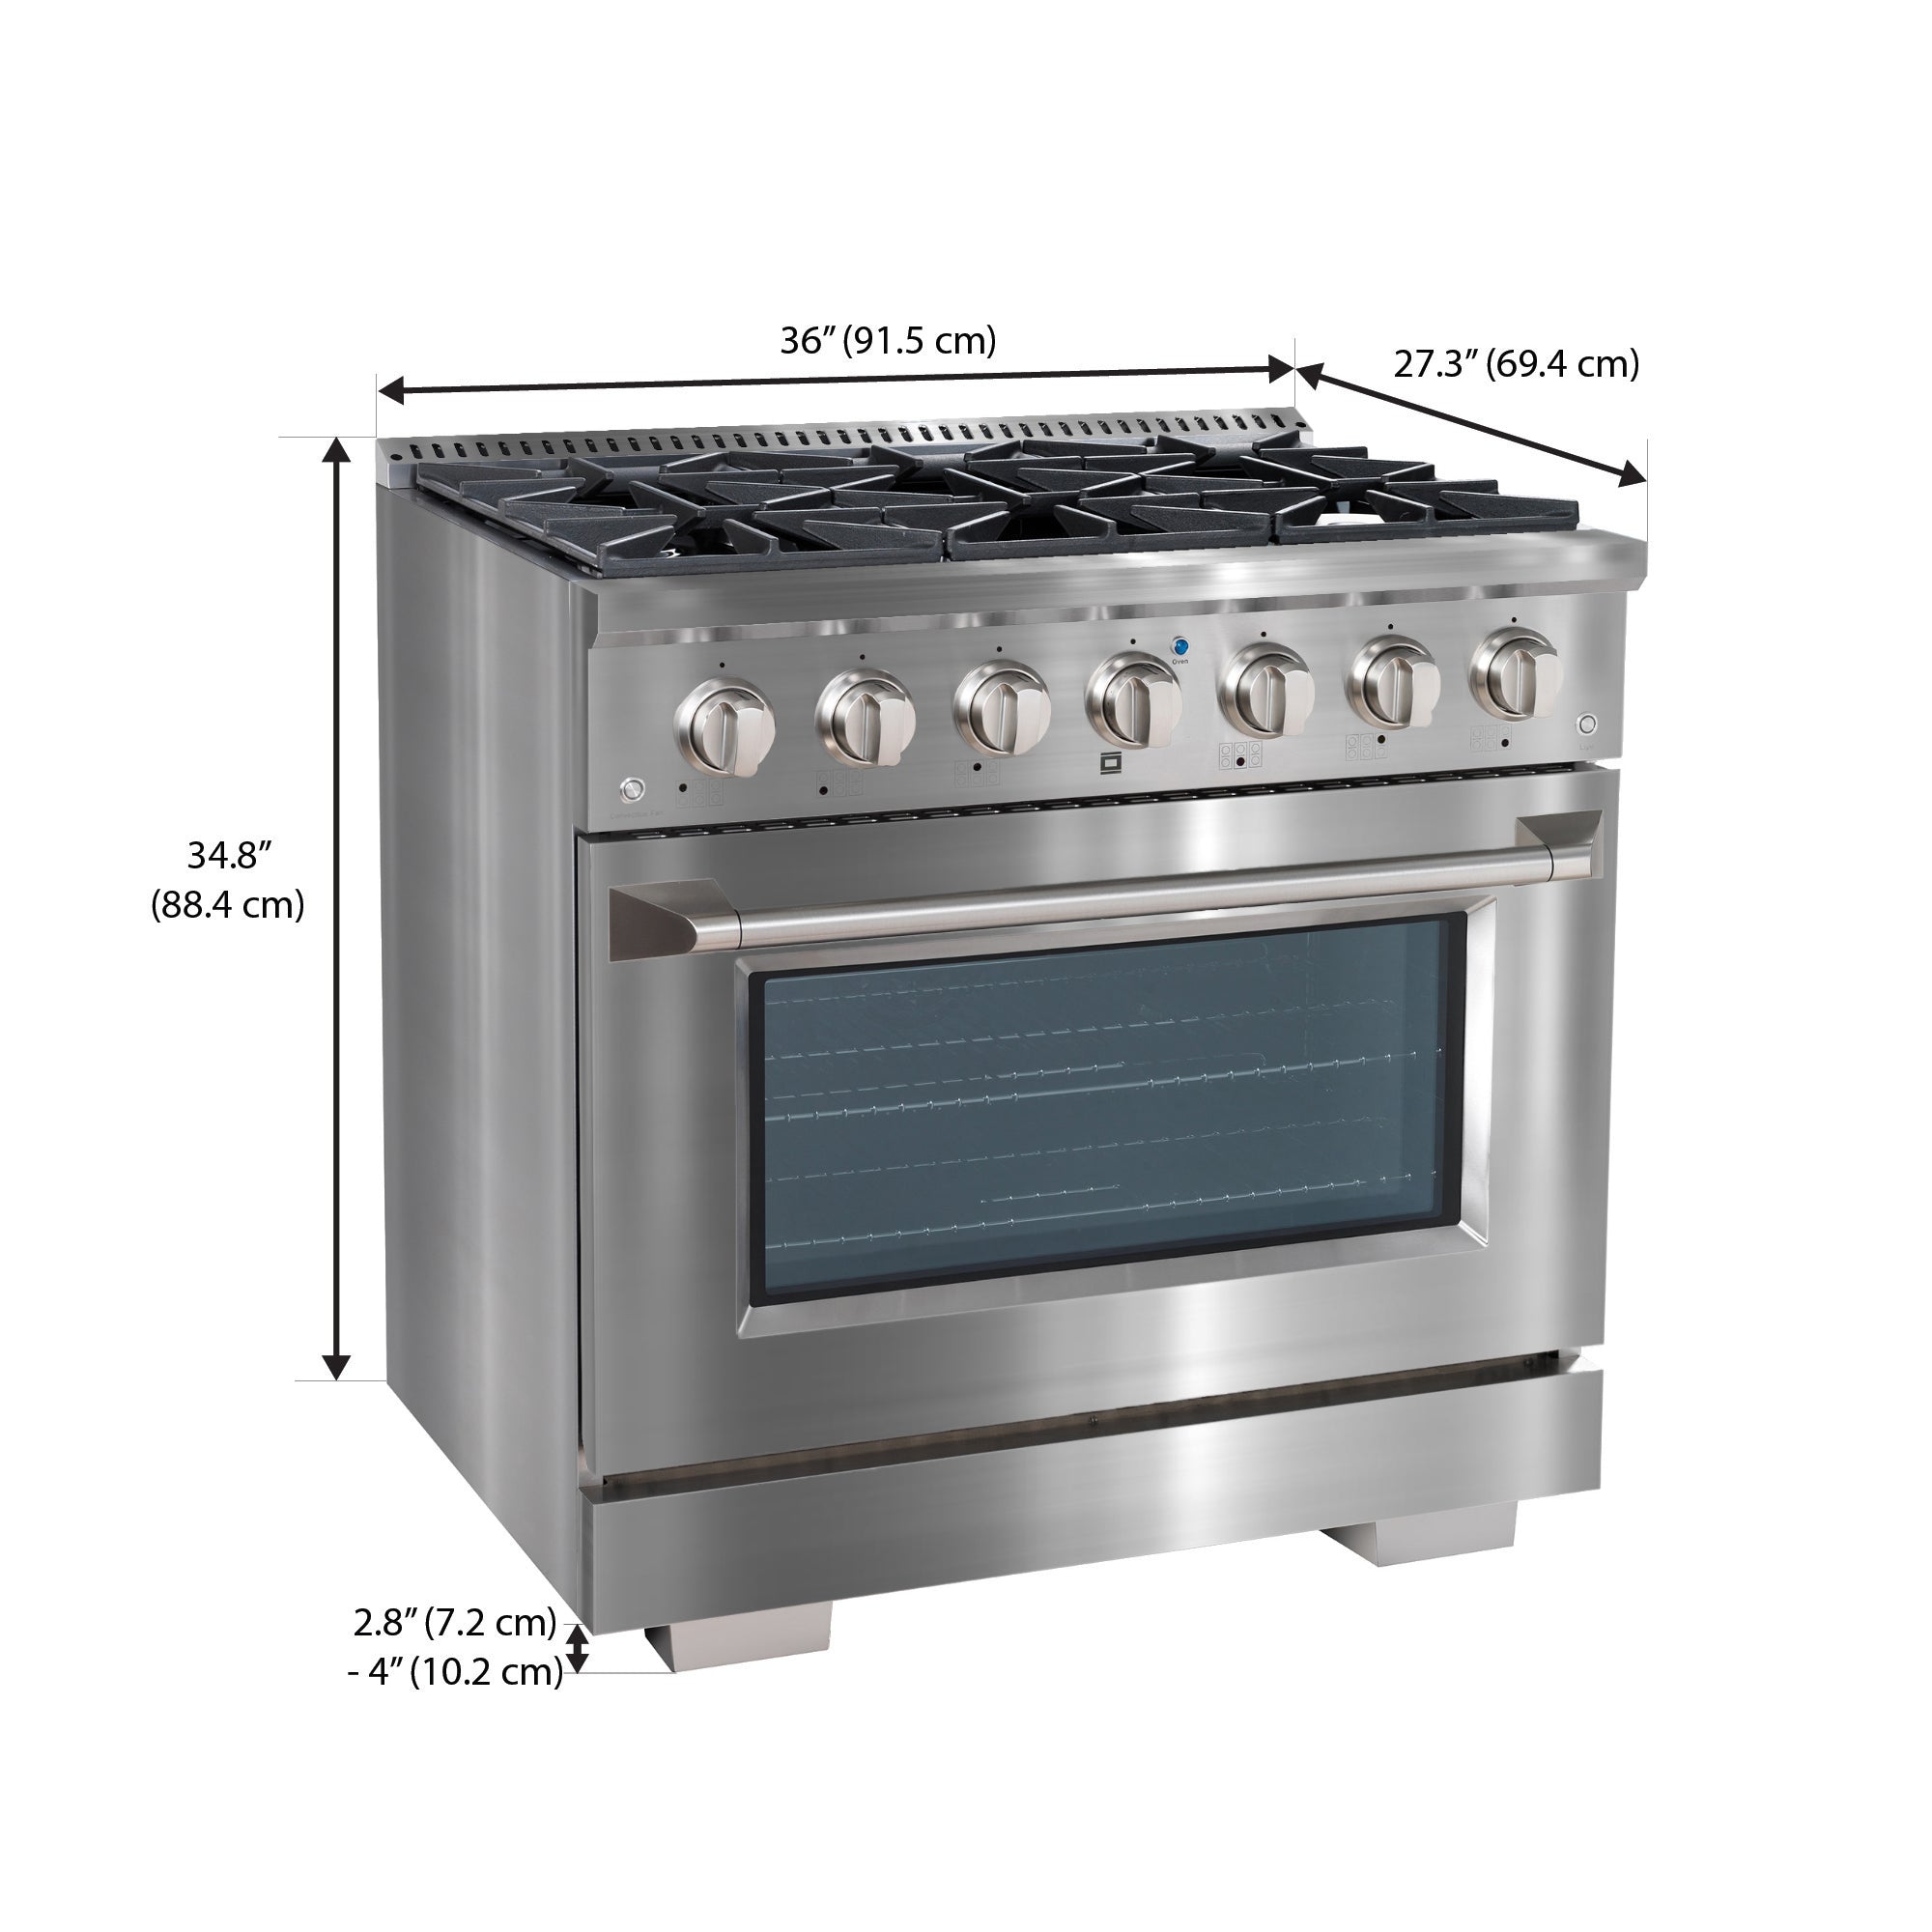 Ancona 36” 5.2 cu. ft. Dual Fuel Range with 6 Burners and Convection Oven in Stainless Steel